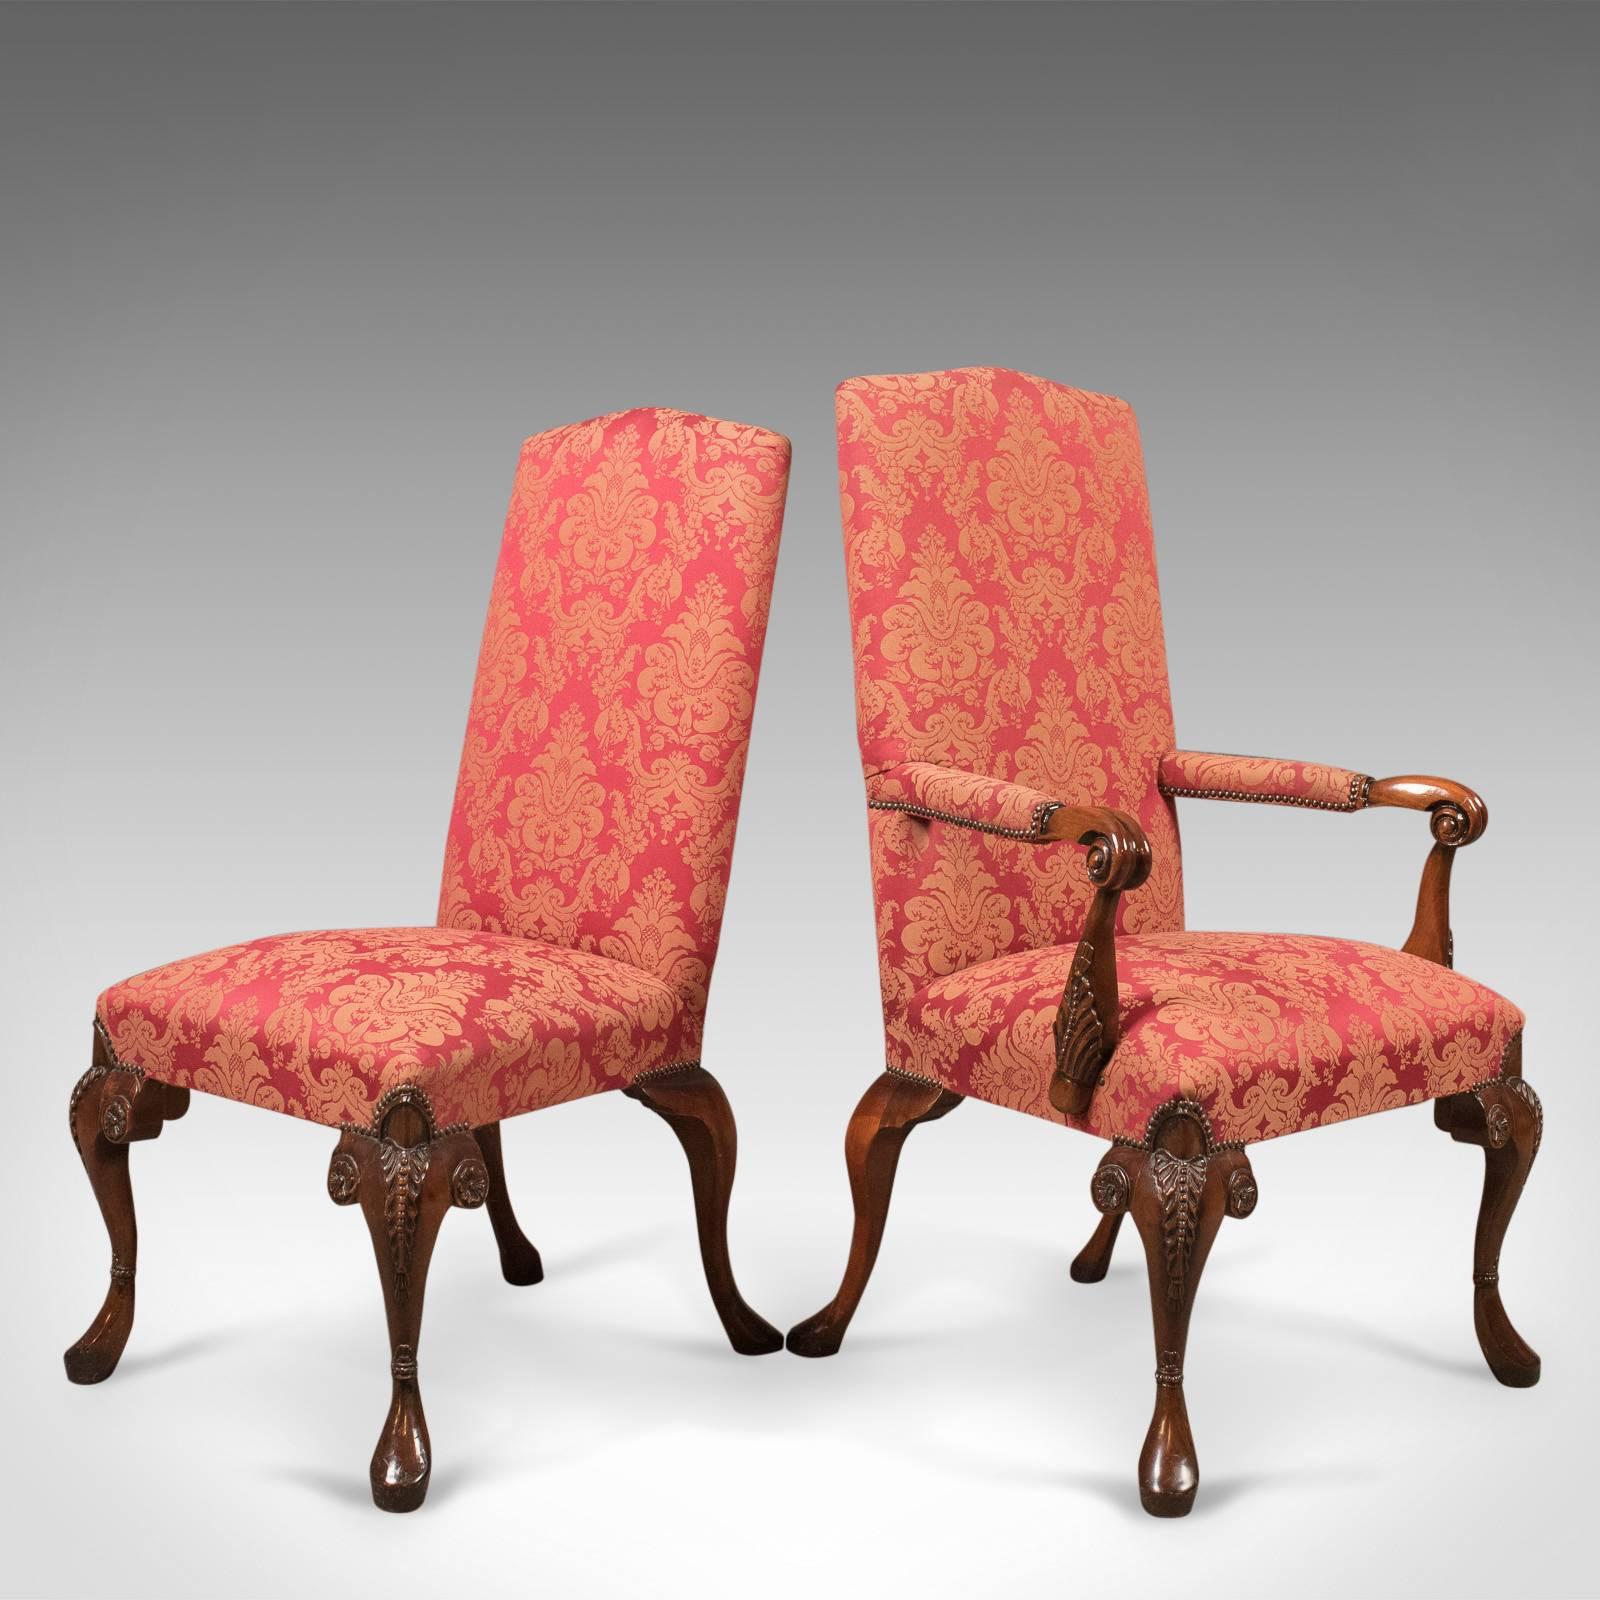 This is an exceptional set of ten upholstered dining chairs in the early 18th century manner.

A pair of carvers and eight standard chairs
Superior quality craftsmanship and finish
Raked back panels for comfort with gently rounded crest